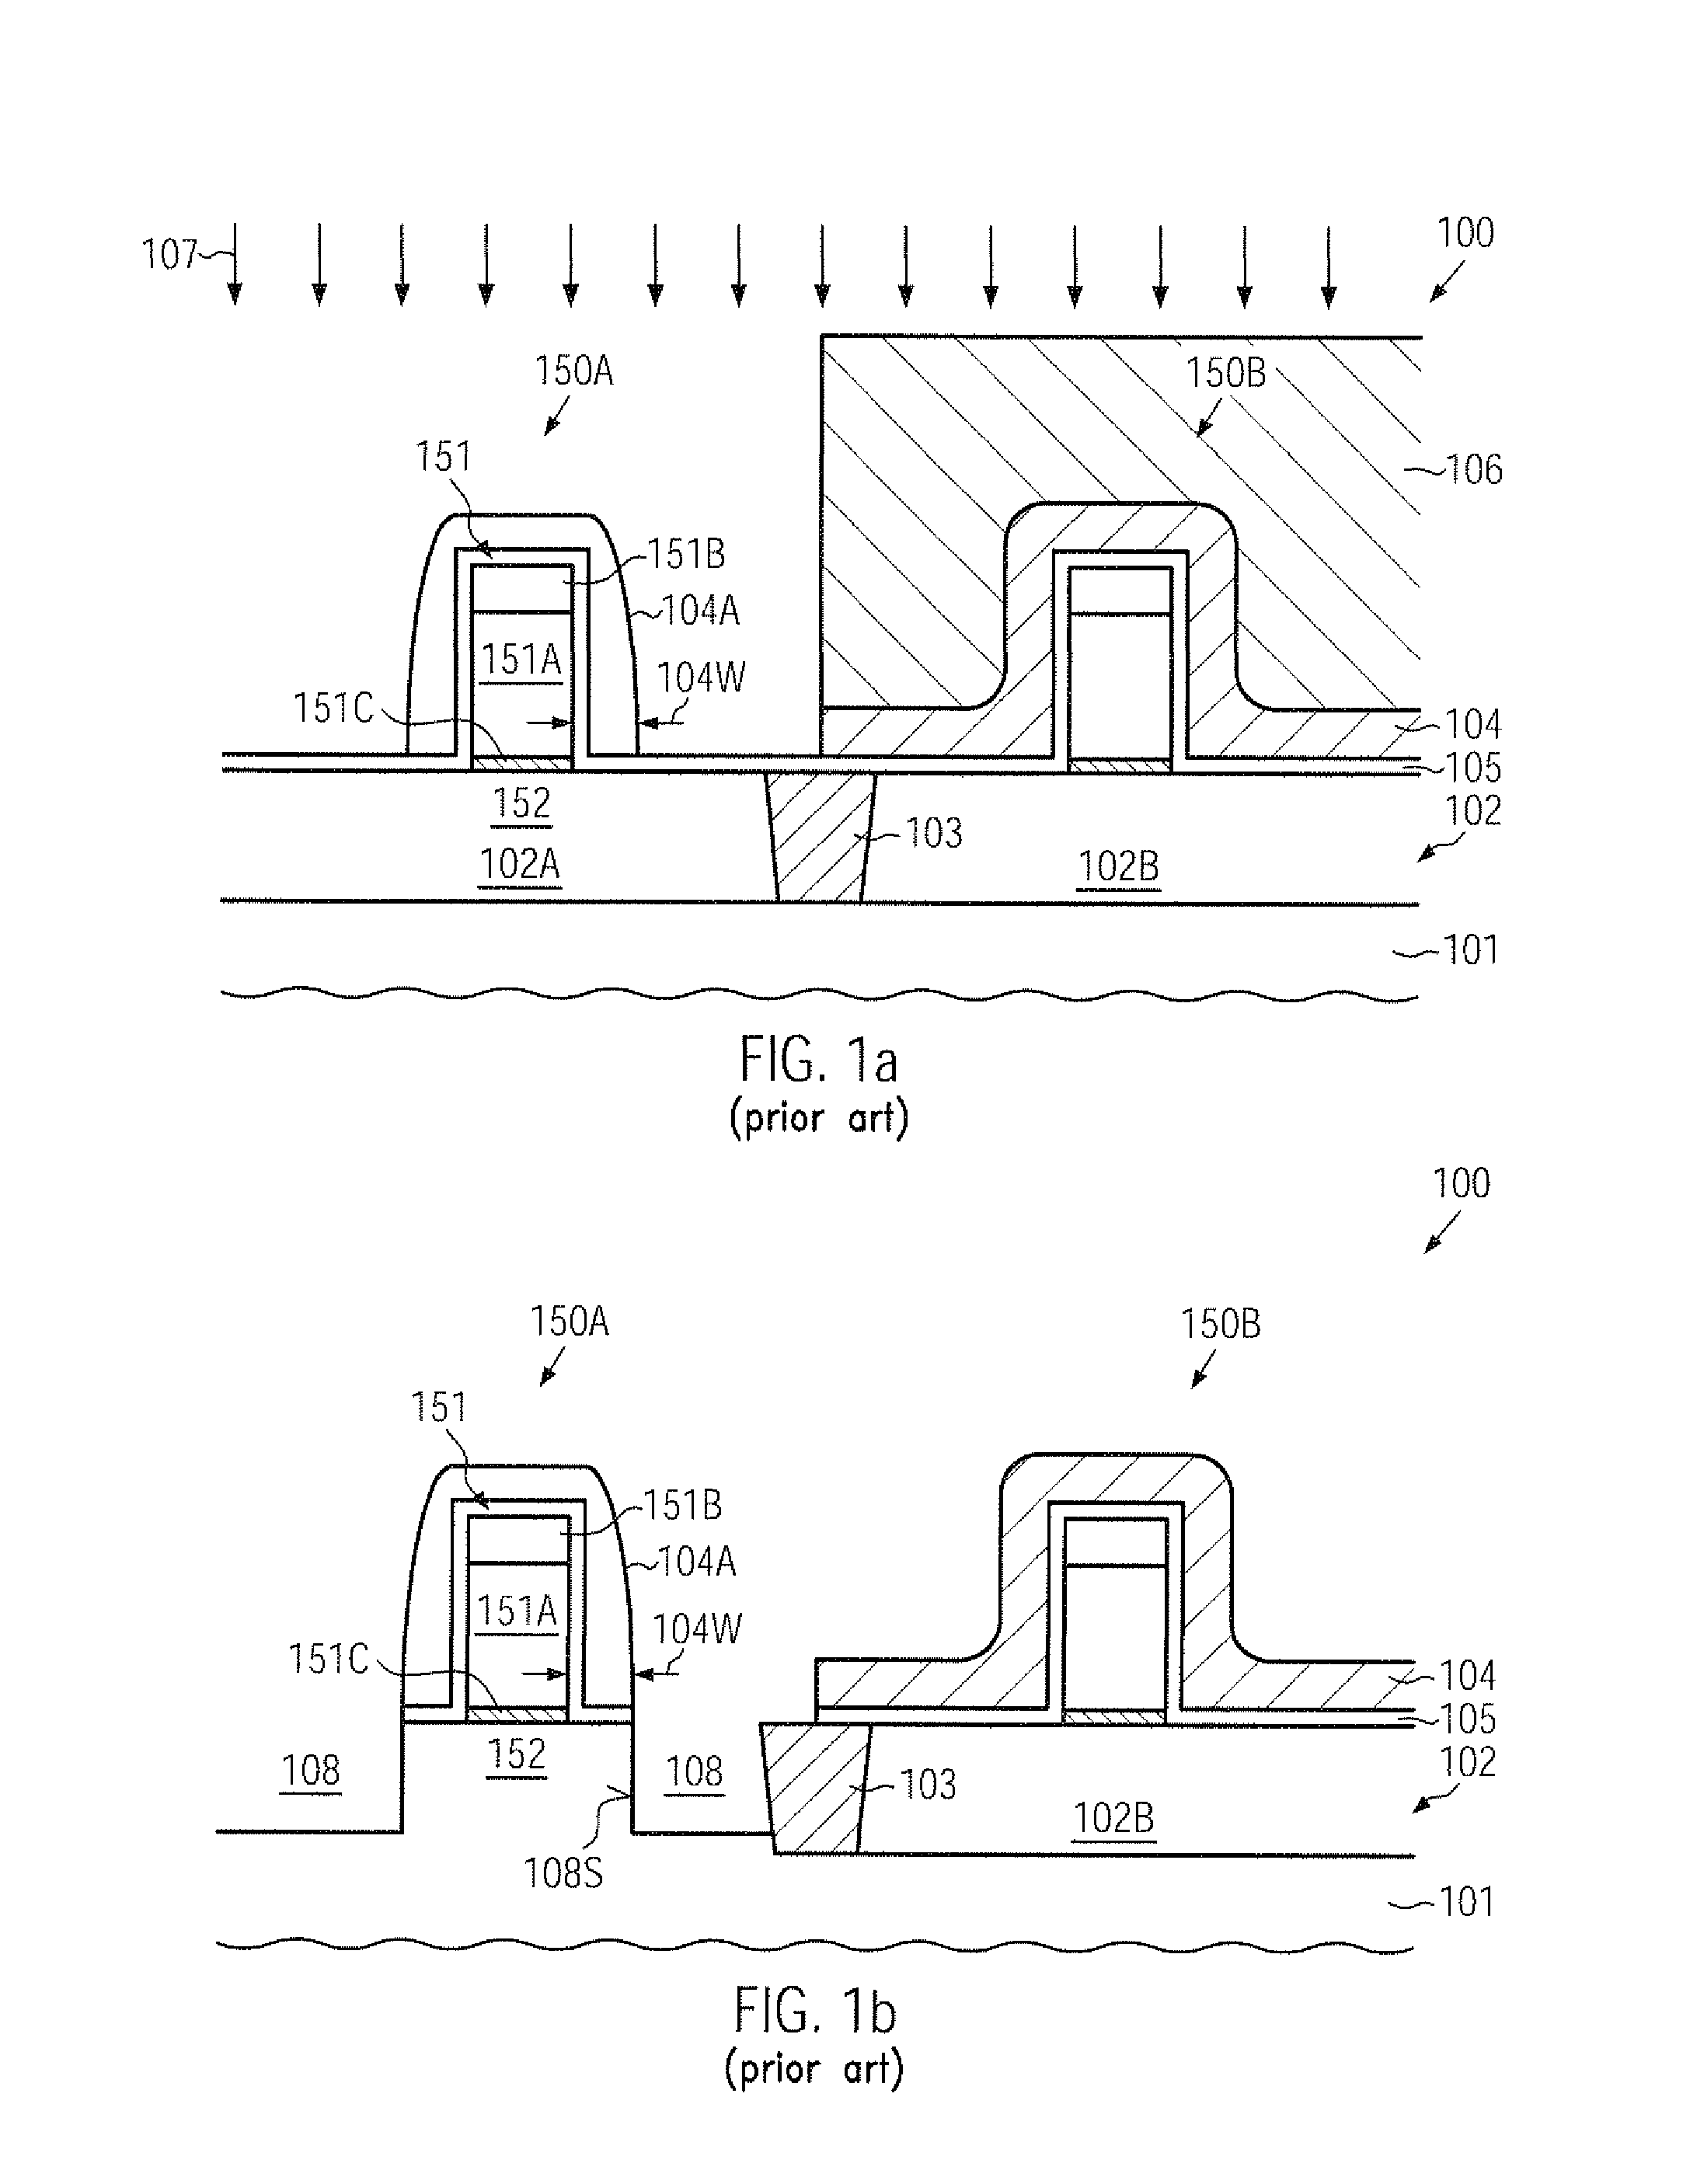 Transistor with embedded si/ge material having reduced offset to the channel region